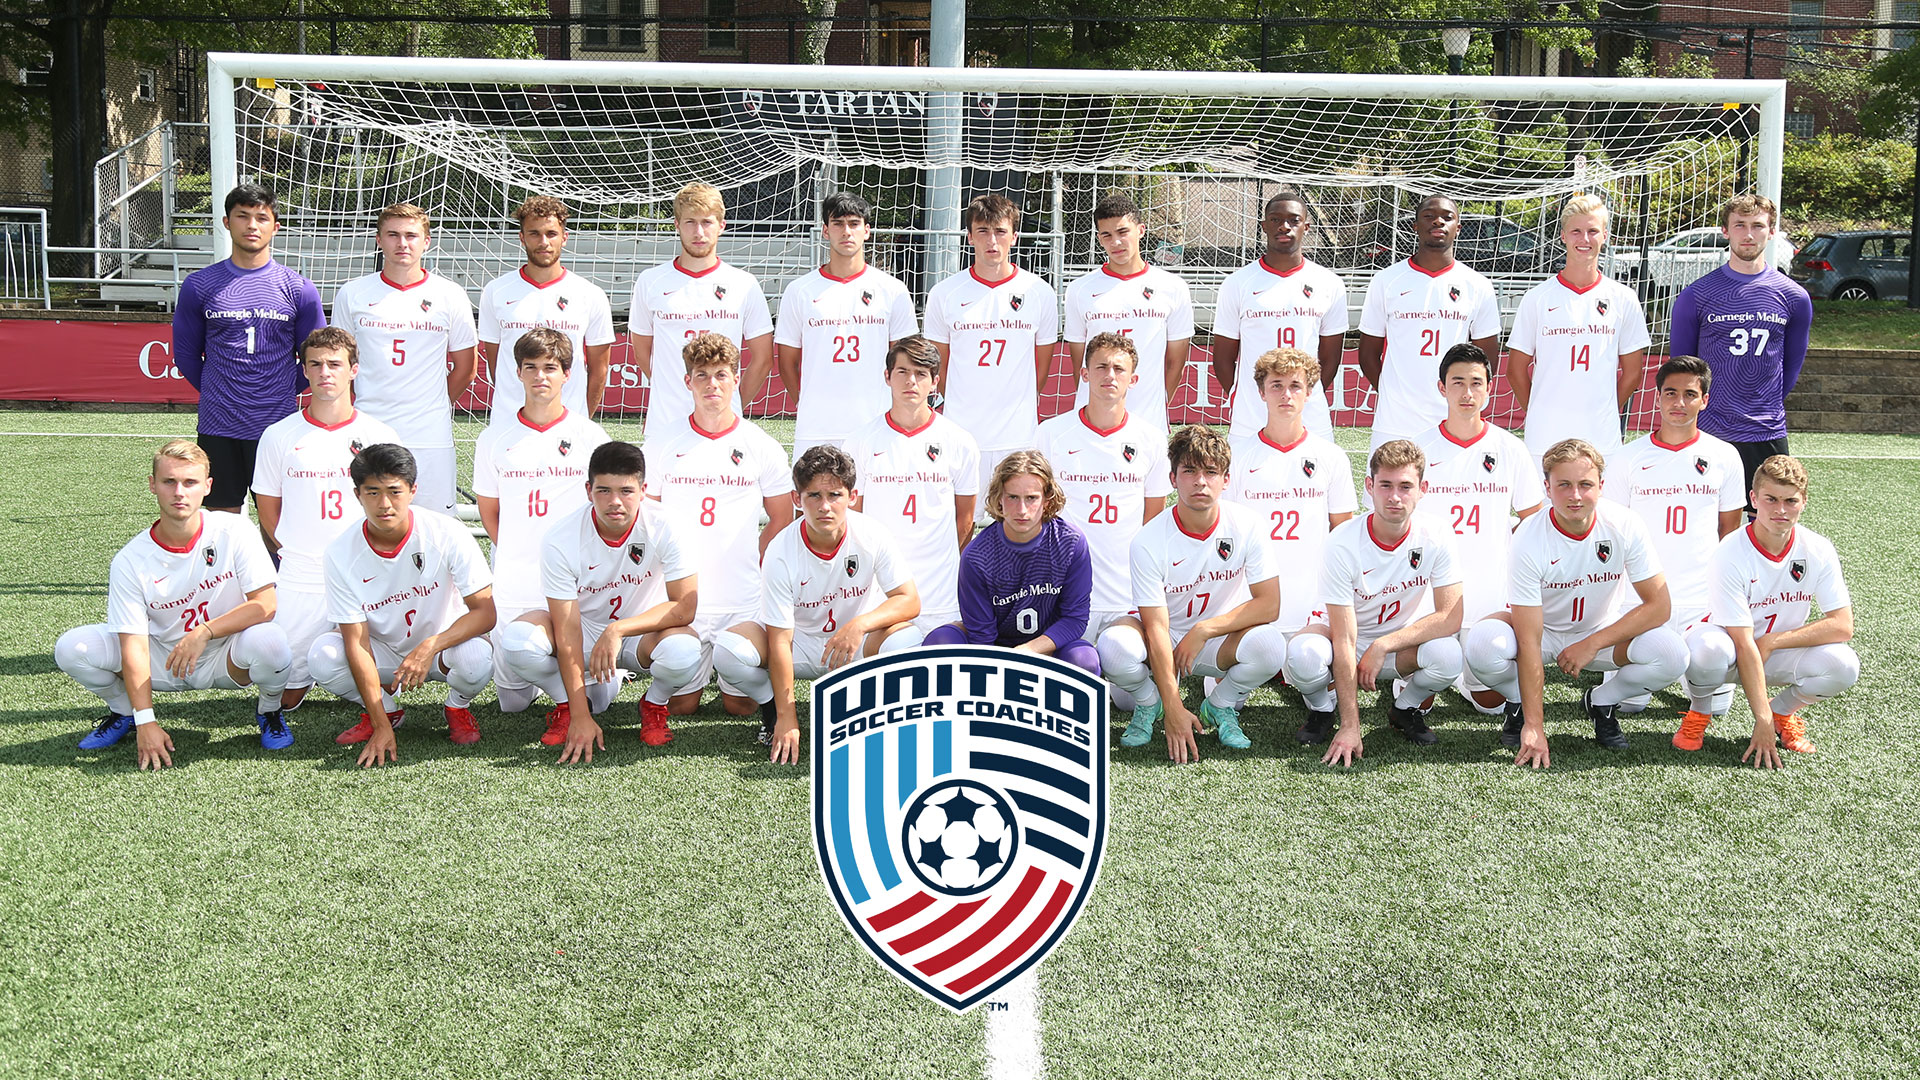 men's soccer group photo with United Soccer Coaches logo